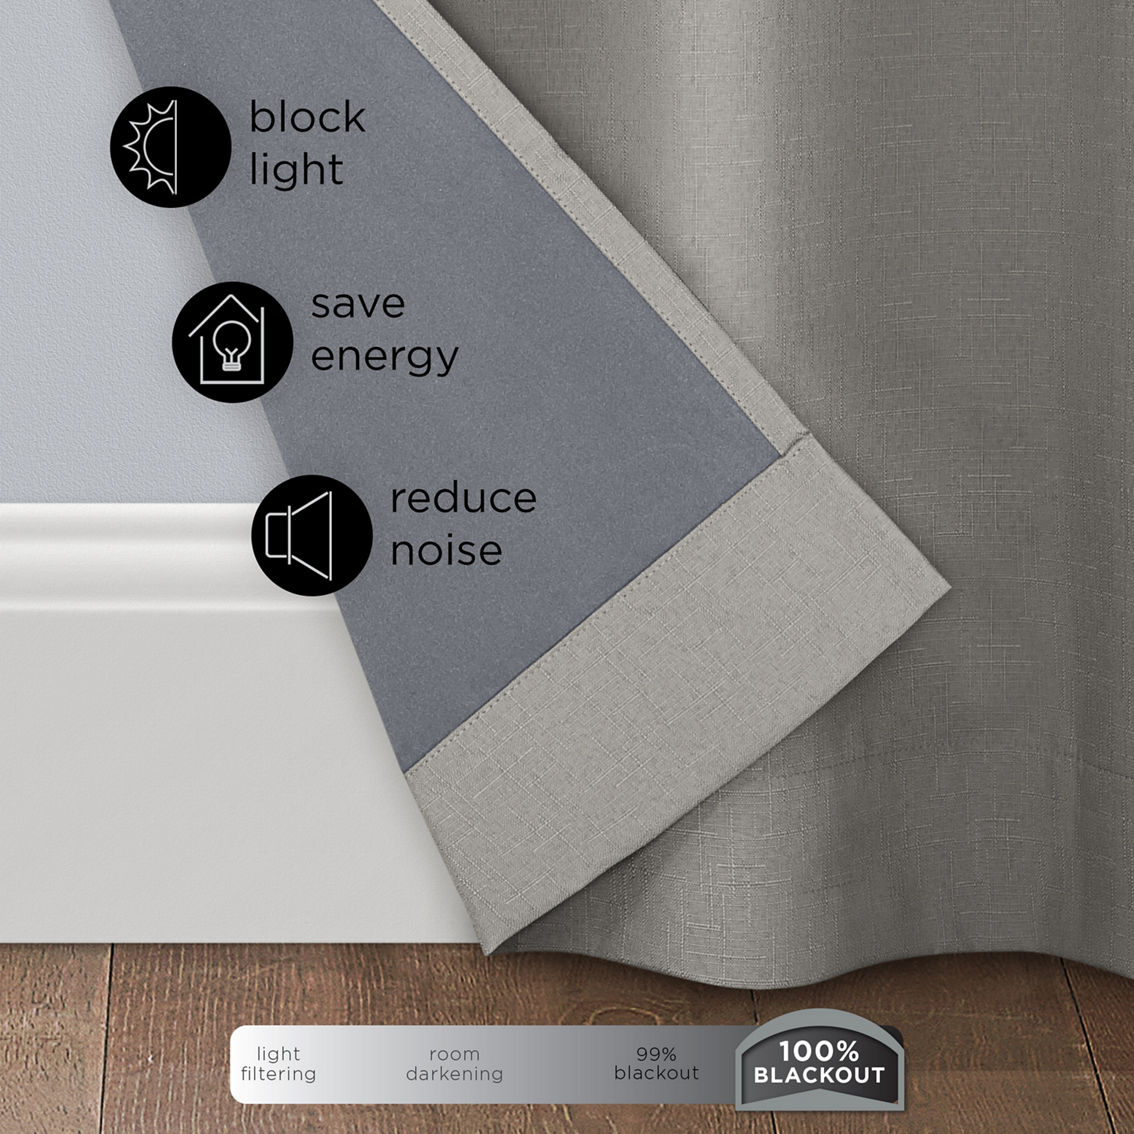 Eclipse Absolute Zero Harper Absolute Zero Blackout Curtain Panel - Image 9 of 9